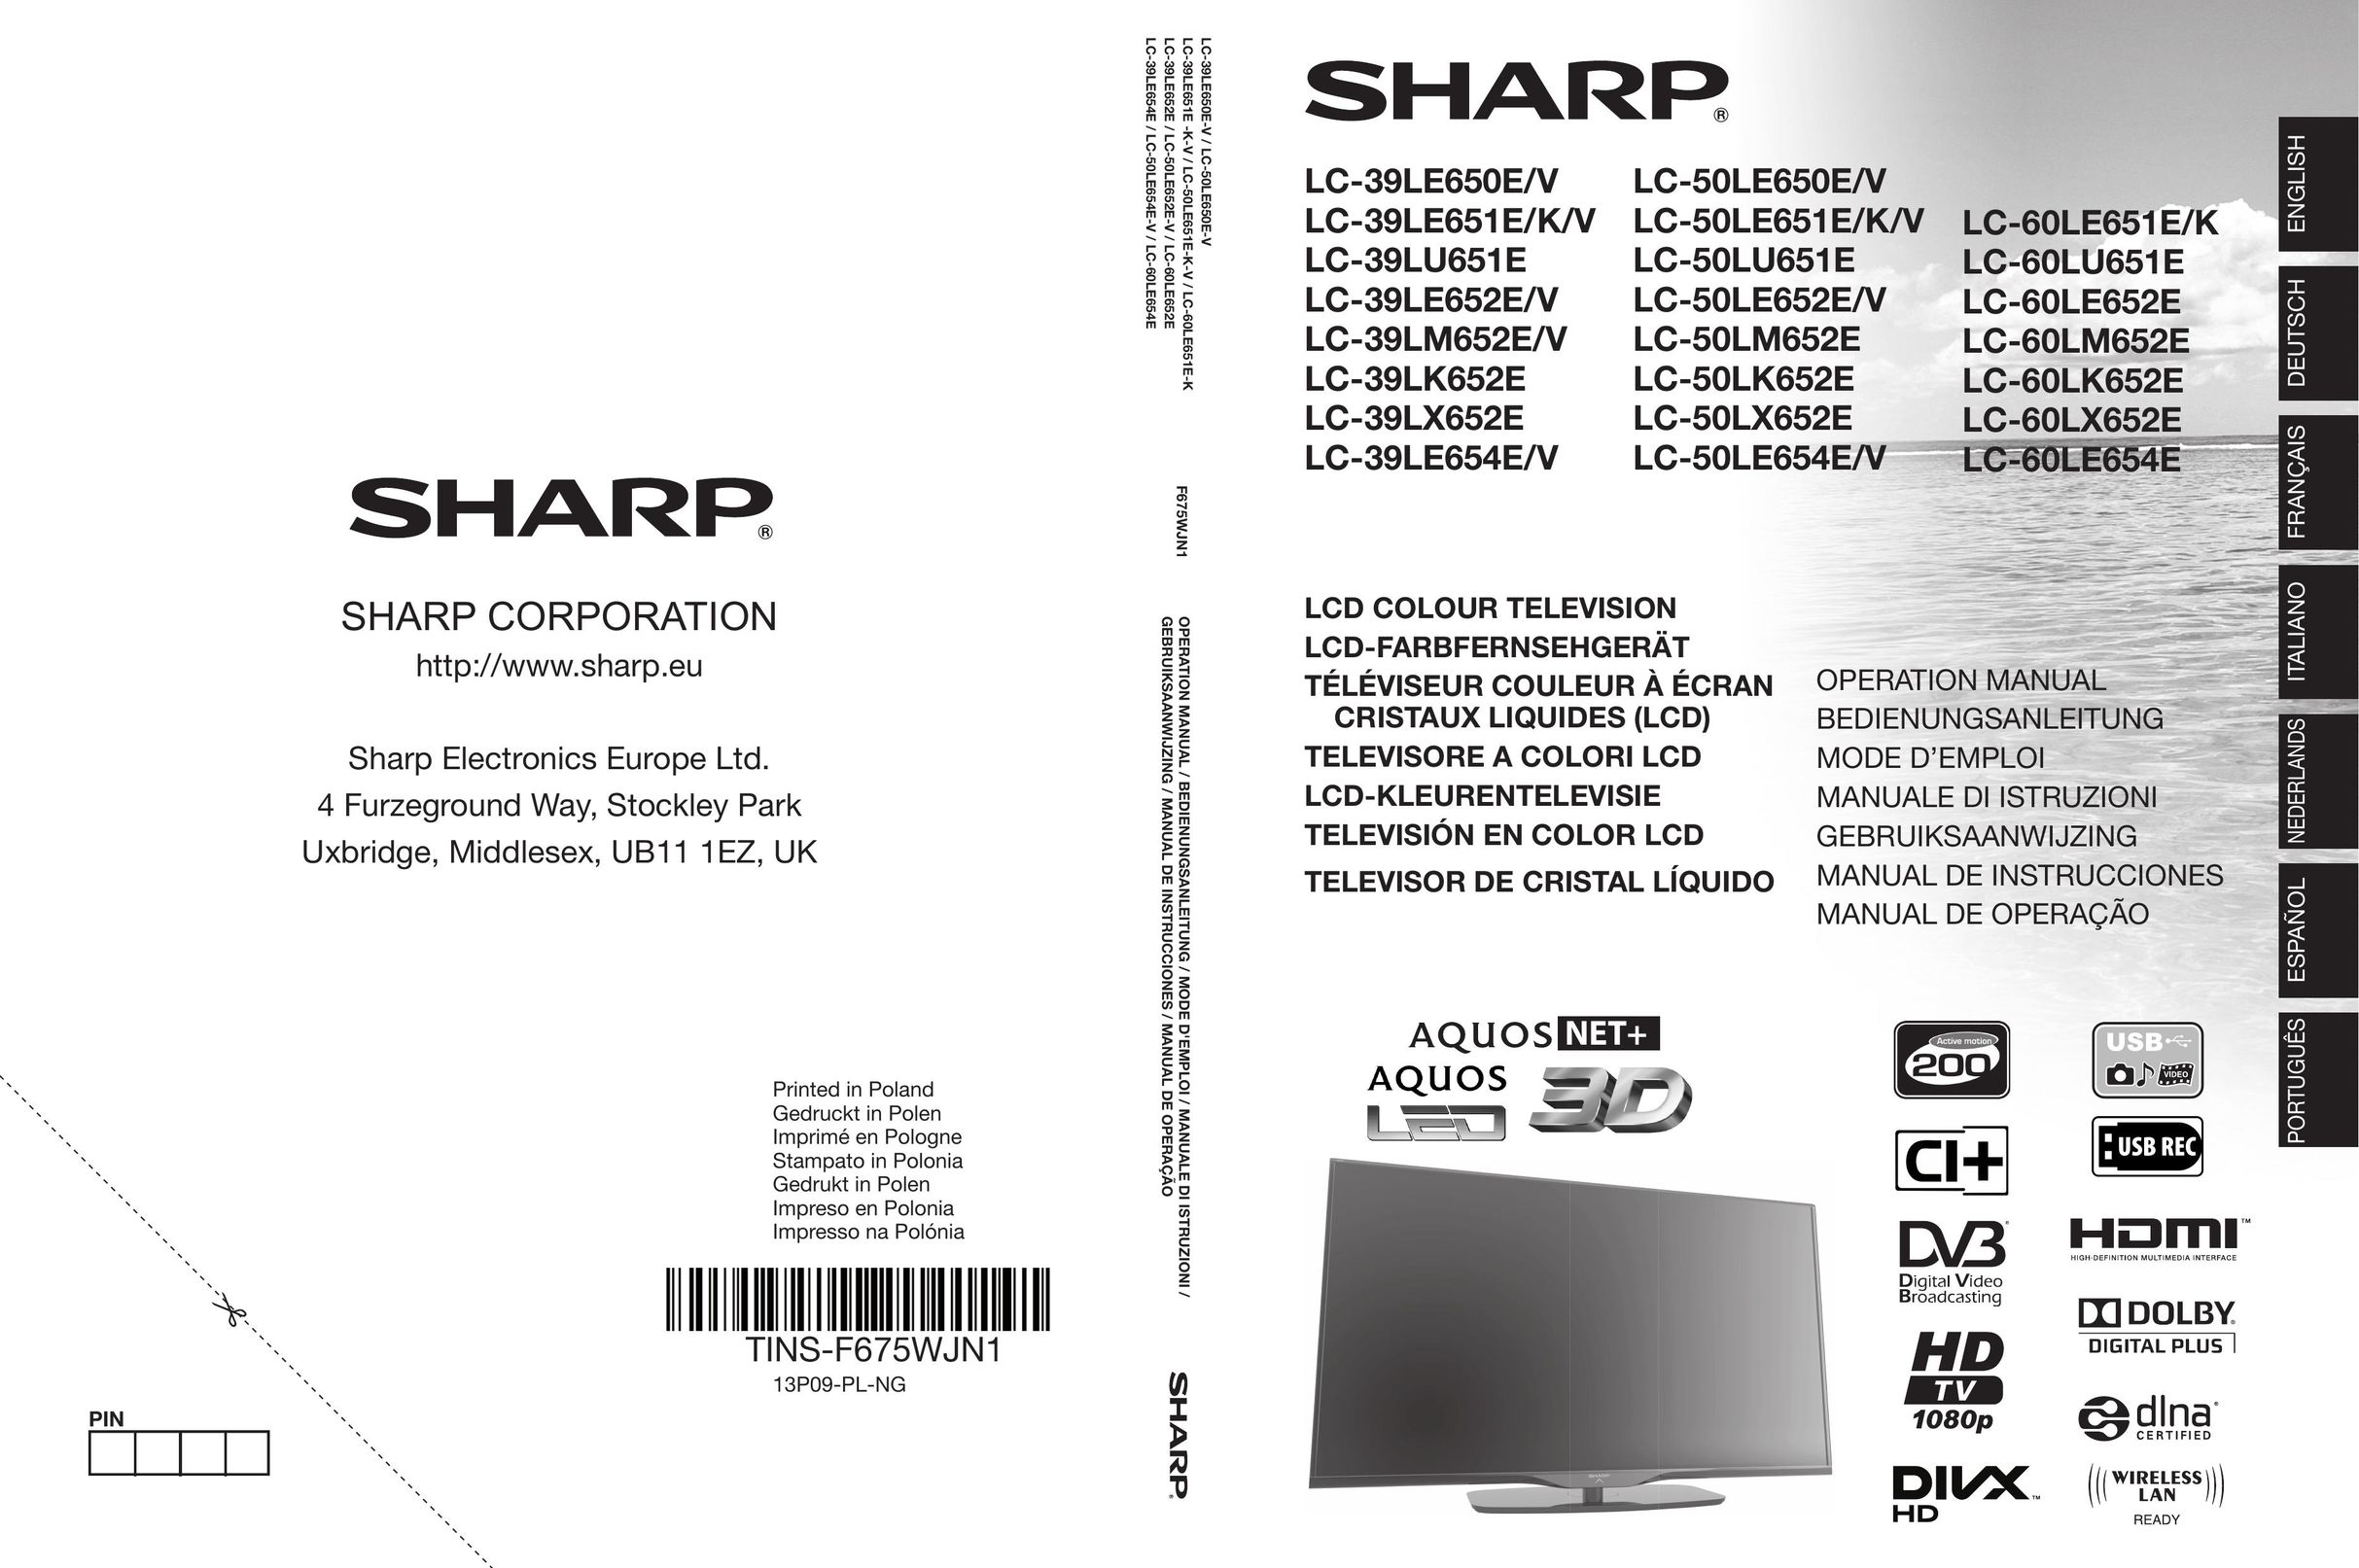 Sharp LCD COLOUR TELEVISION Car Video System User Manual